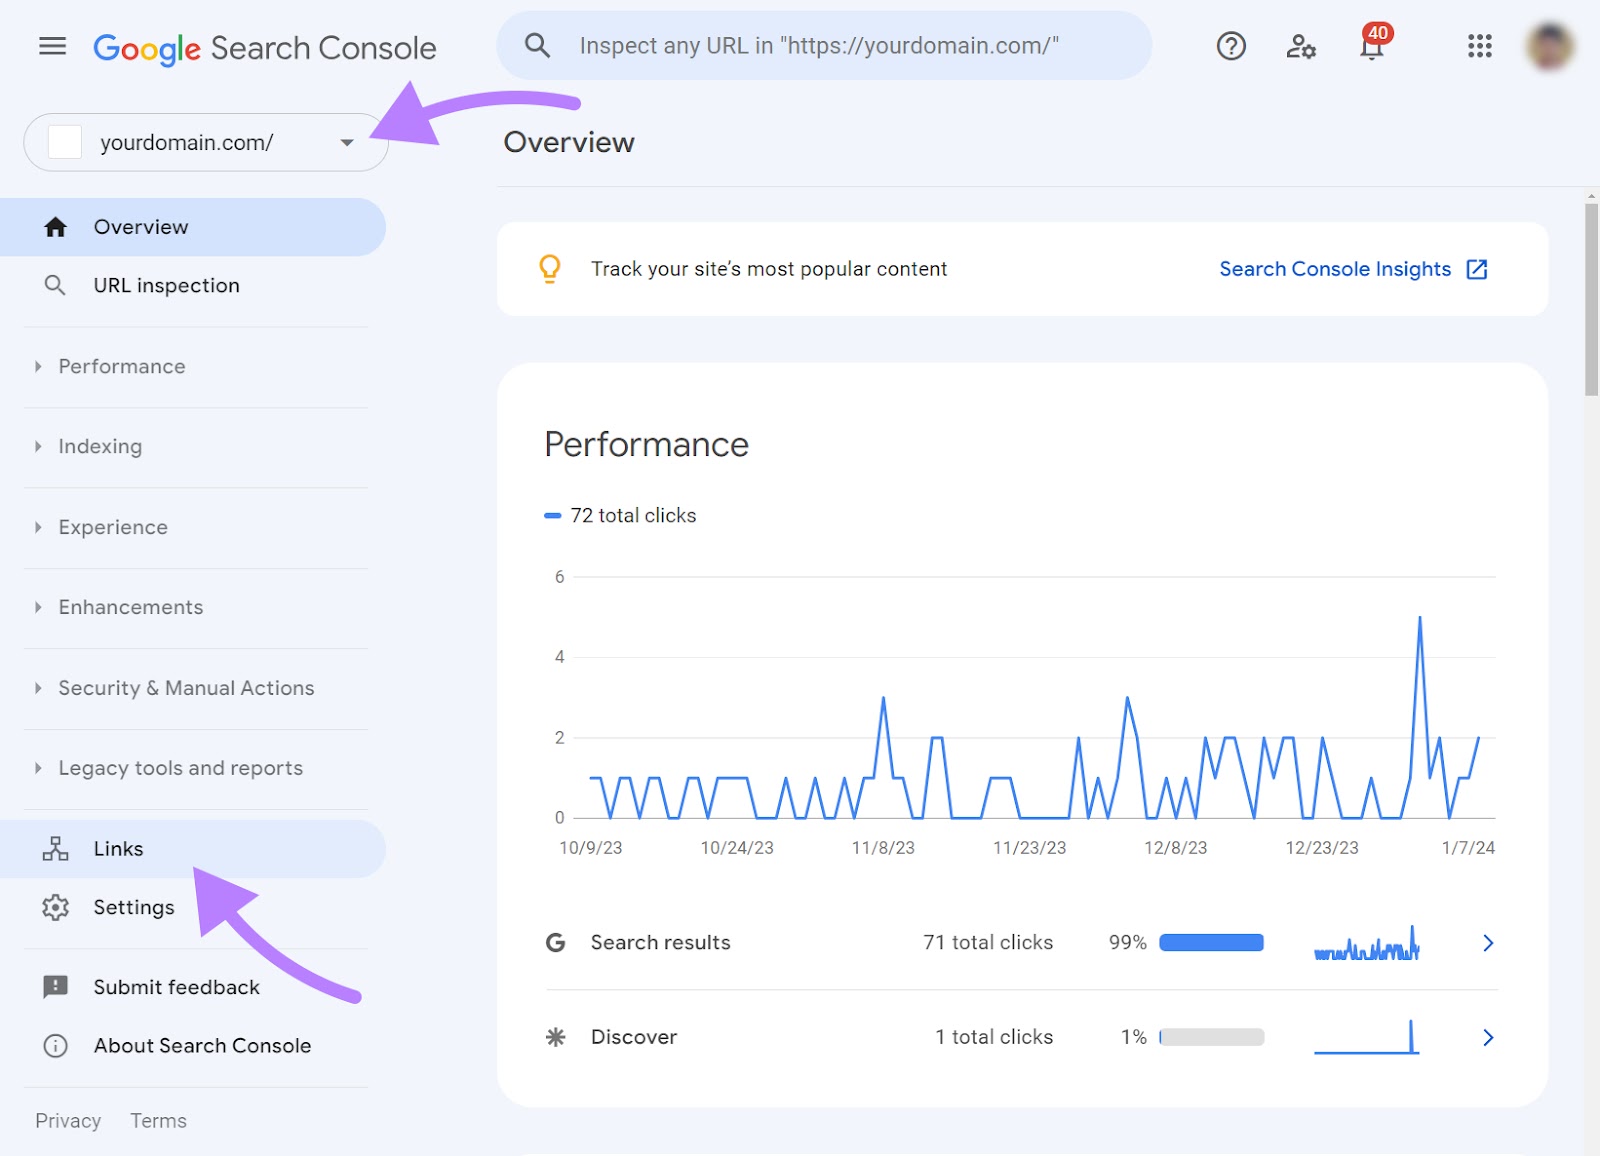 Navigating to “Links” in Google Search Console menu